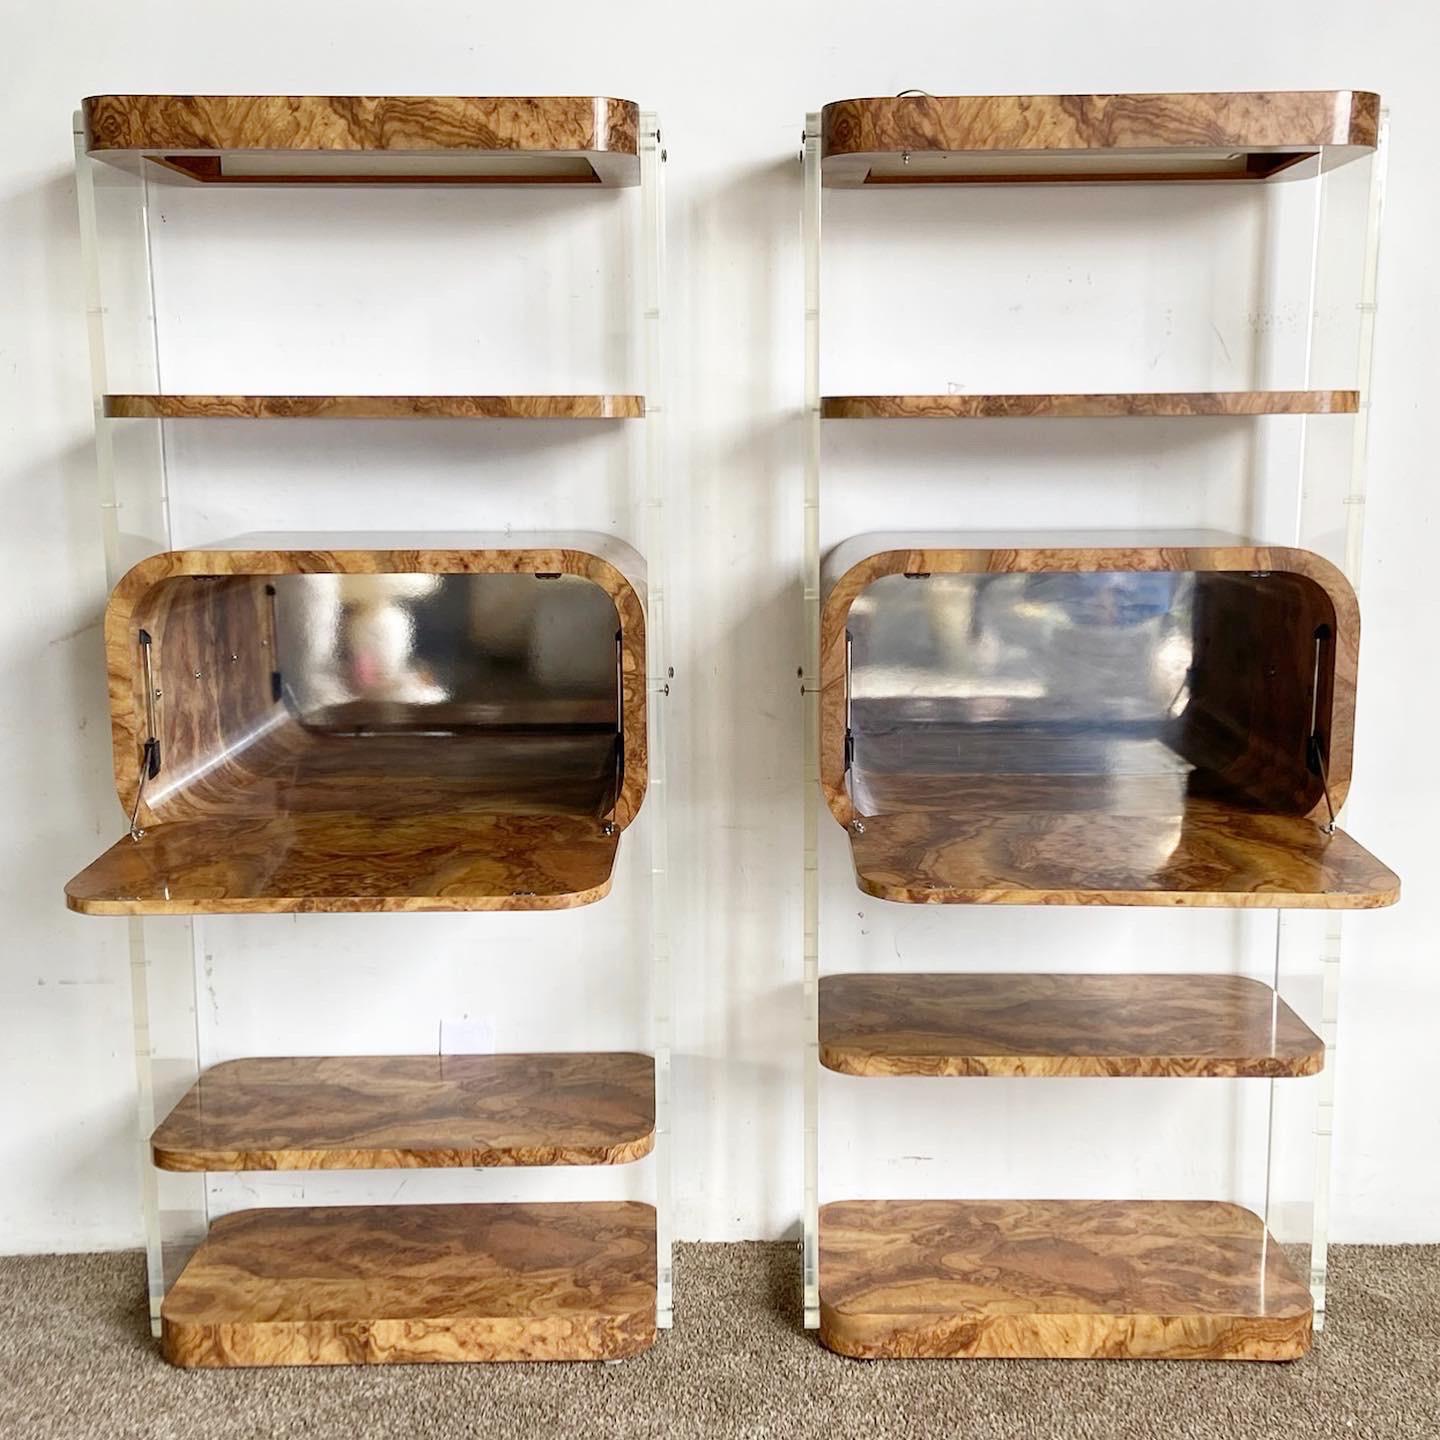 Elevate your interior with our Postmodern Burl Wood Laminate and Lucite Modular Wall Unit/Etagere/Dry Bar, blending burl wood, Lucite, and versatility.

Combines burl wood laminate and clear Lucite for a unique postmodern look.
Modular design with